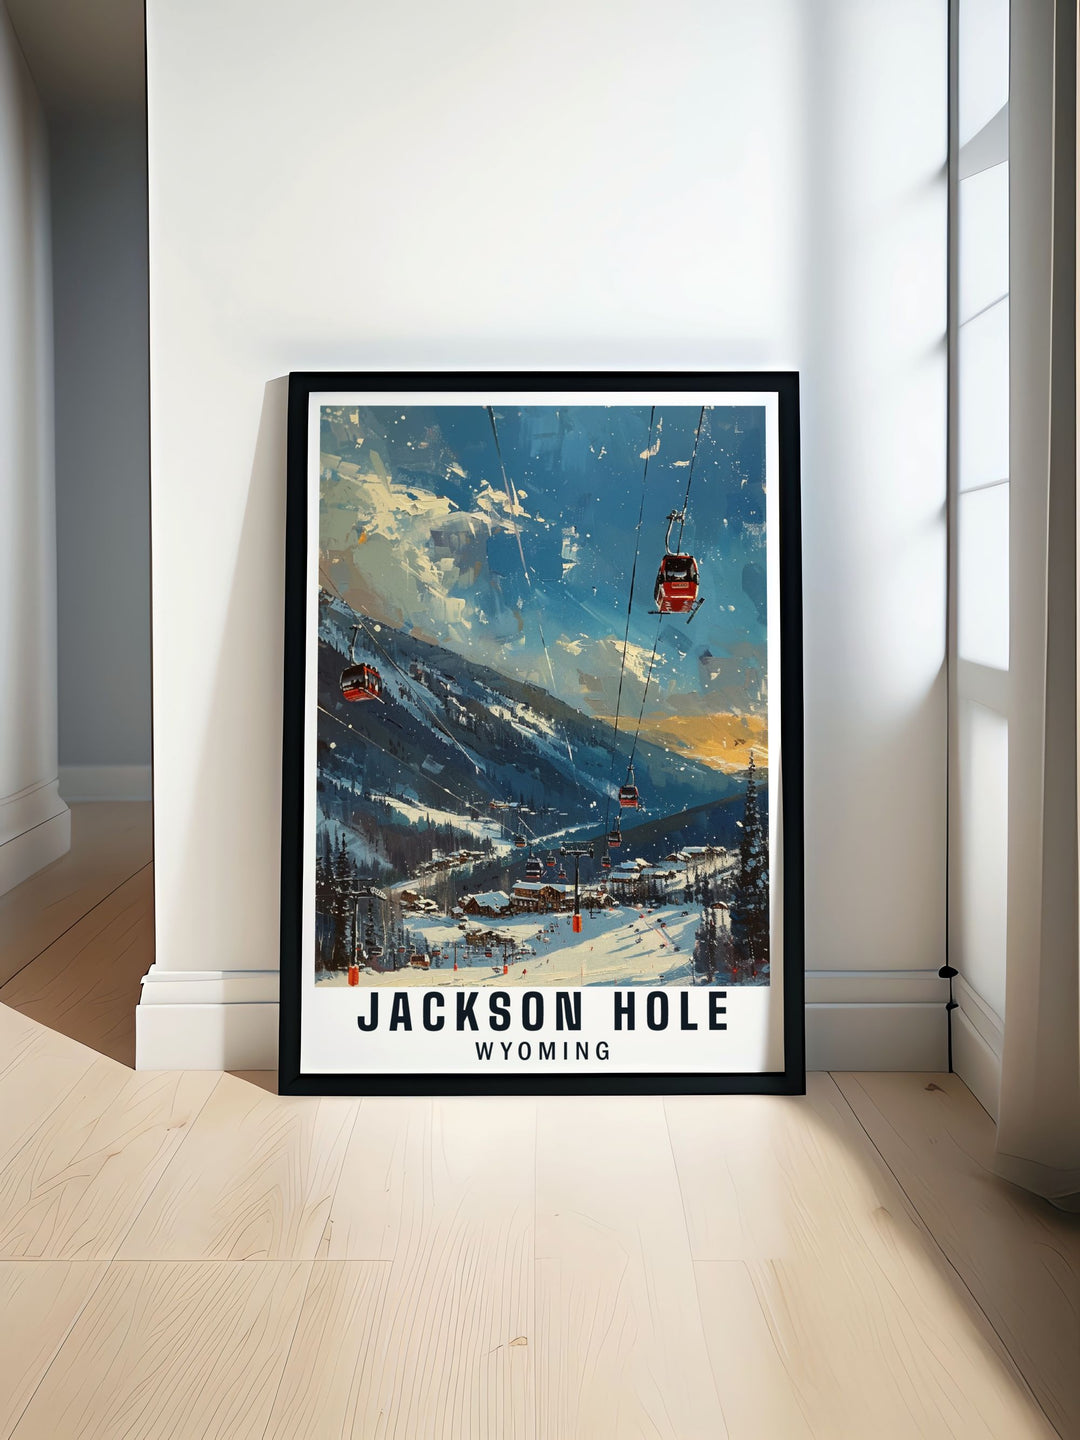 The stunning peaks of Jackson Hole and the thrilling slopes of the Mountain Resort are highlighted in this detailed art print, perfect for adding adventure to your home decor.